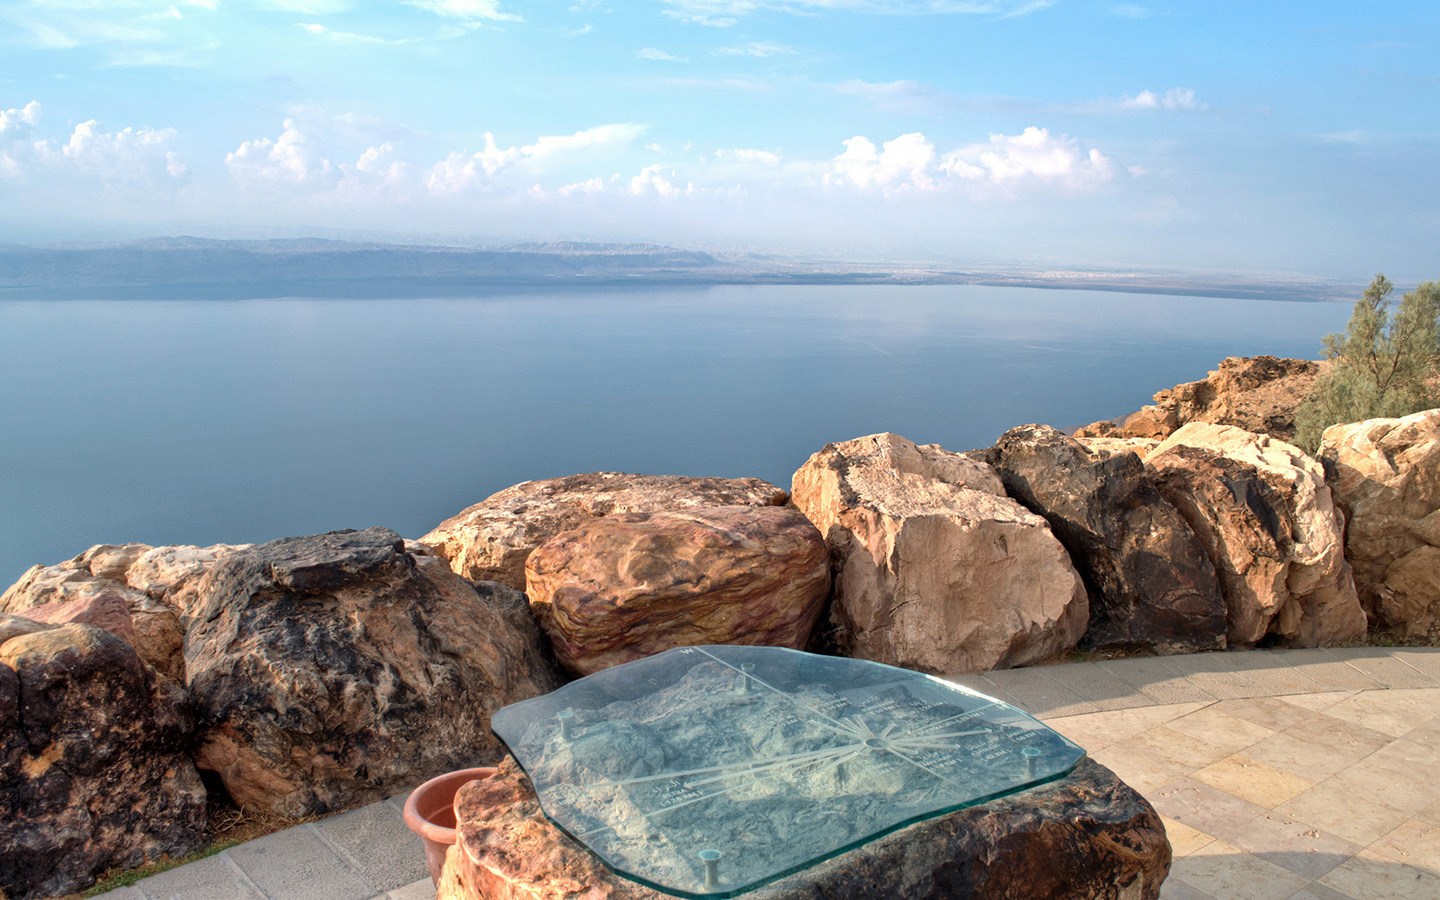 Views from the Dead Sea Panoramic Complex in Jordan